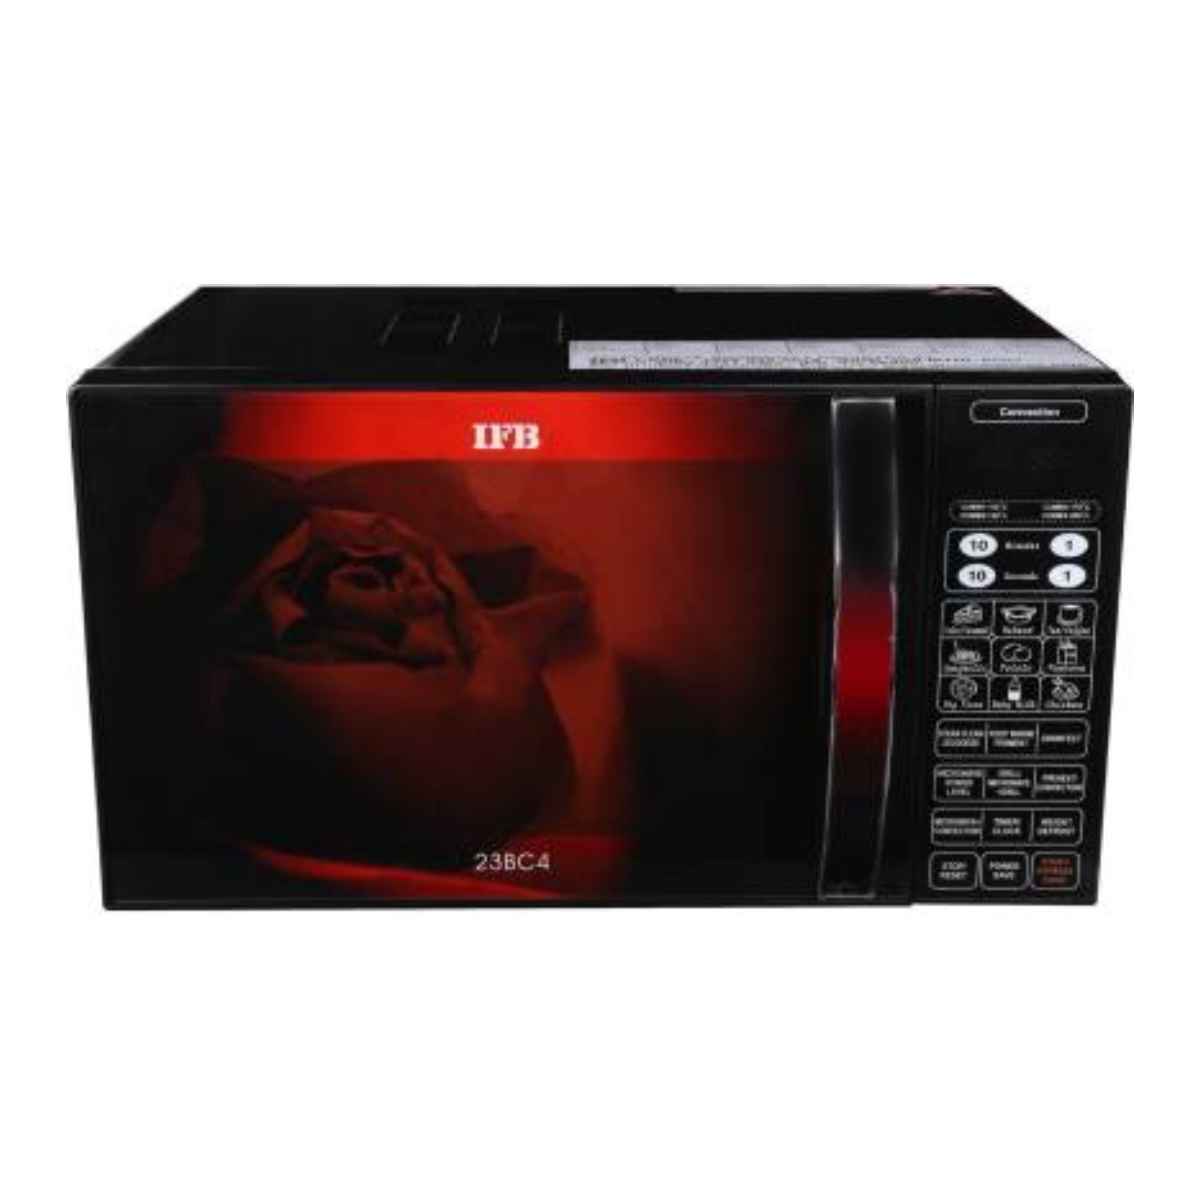 IFB 23 L Convection Microwave Oven (23BC4)